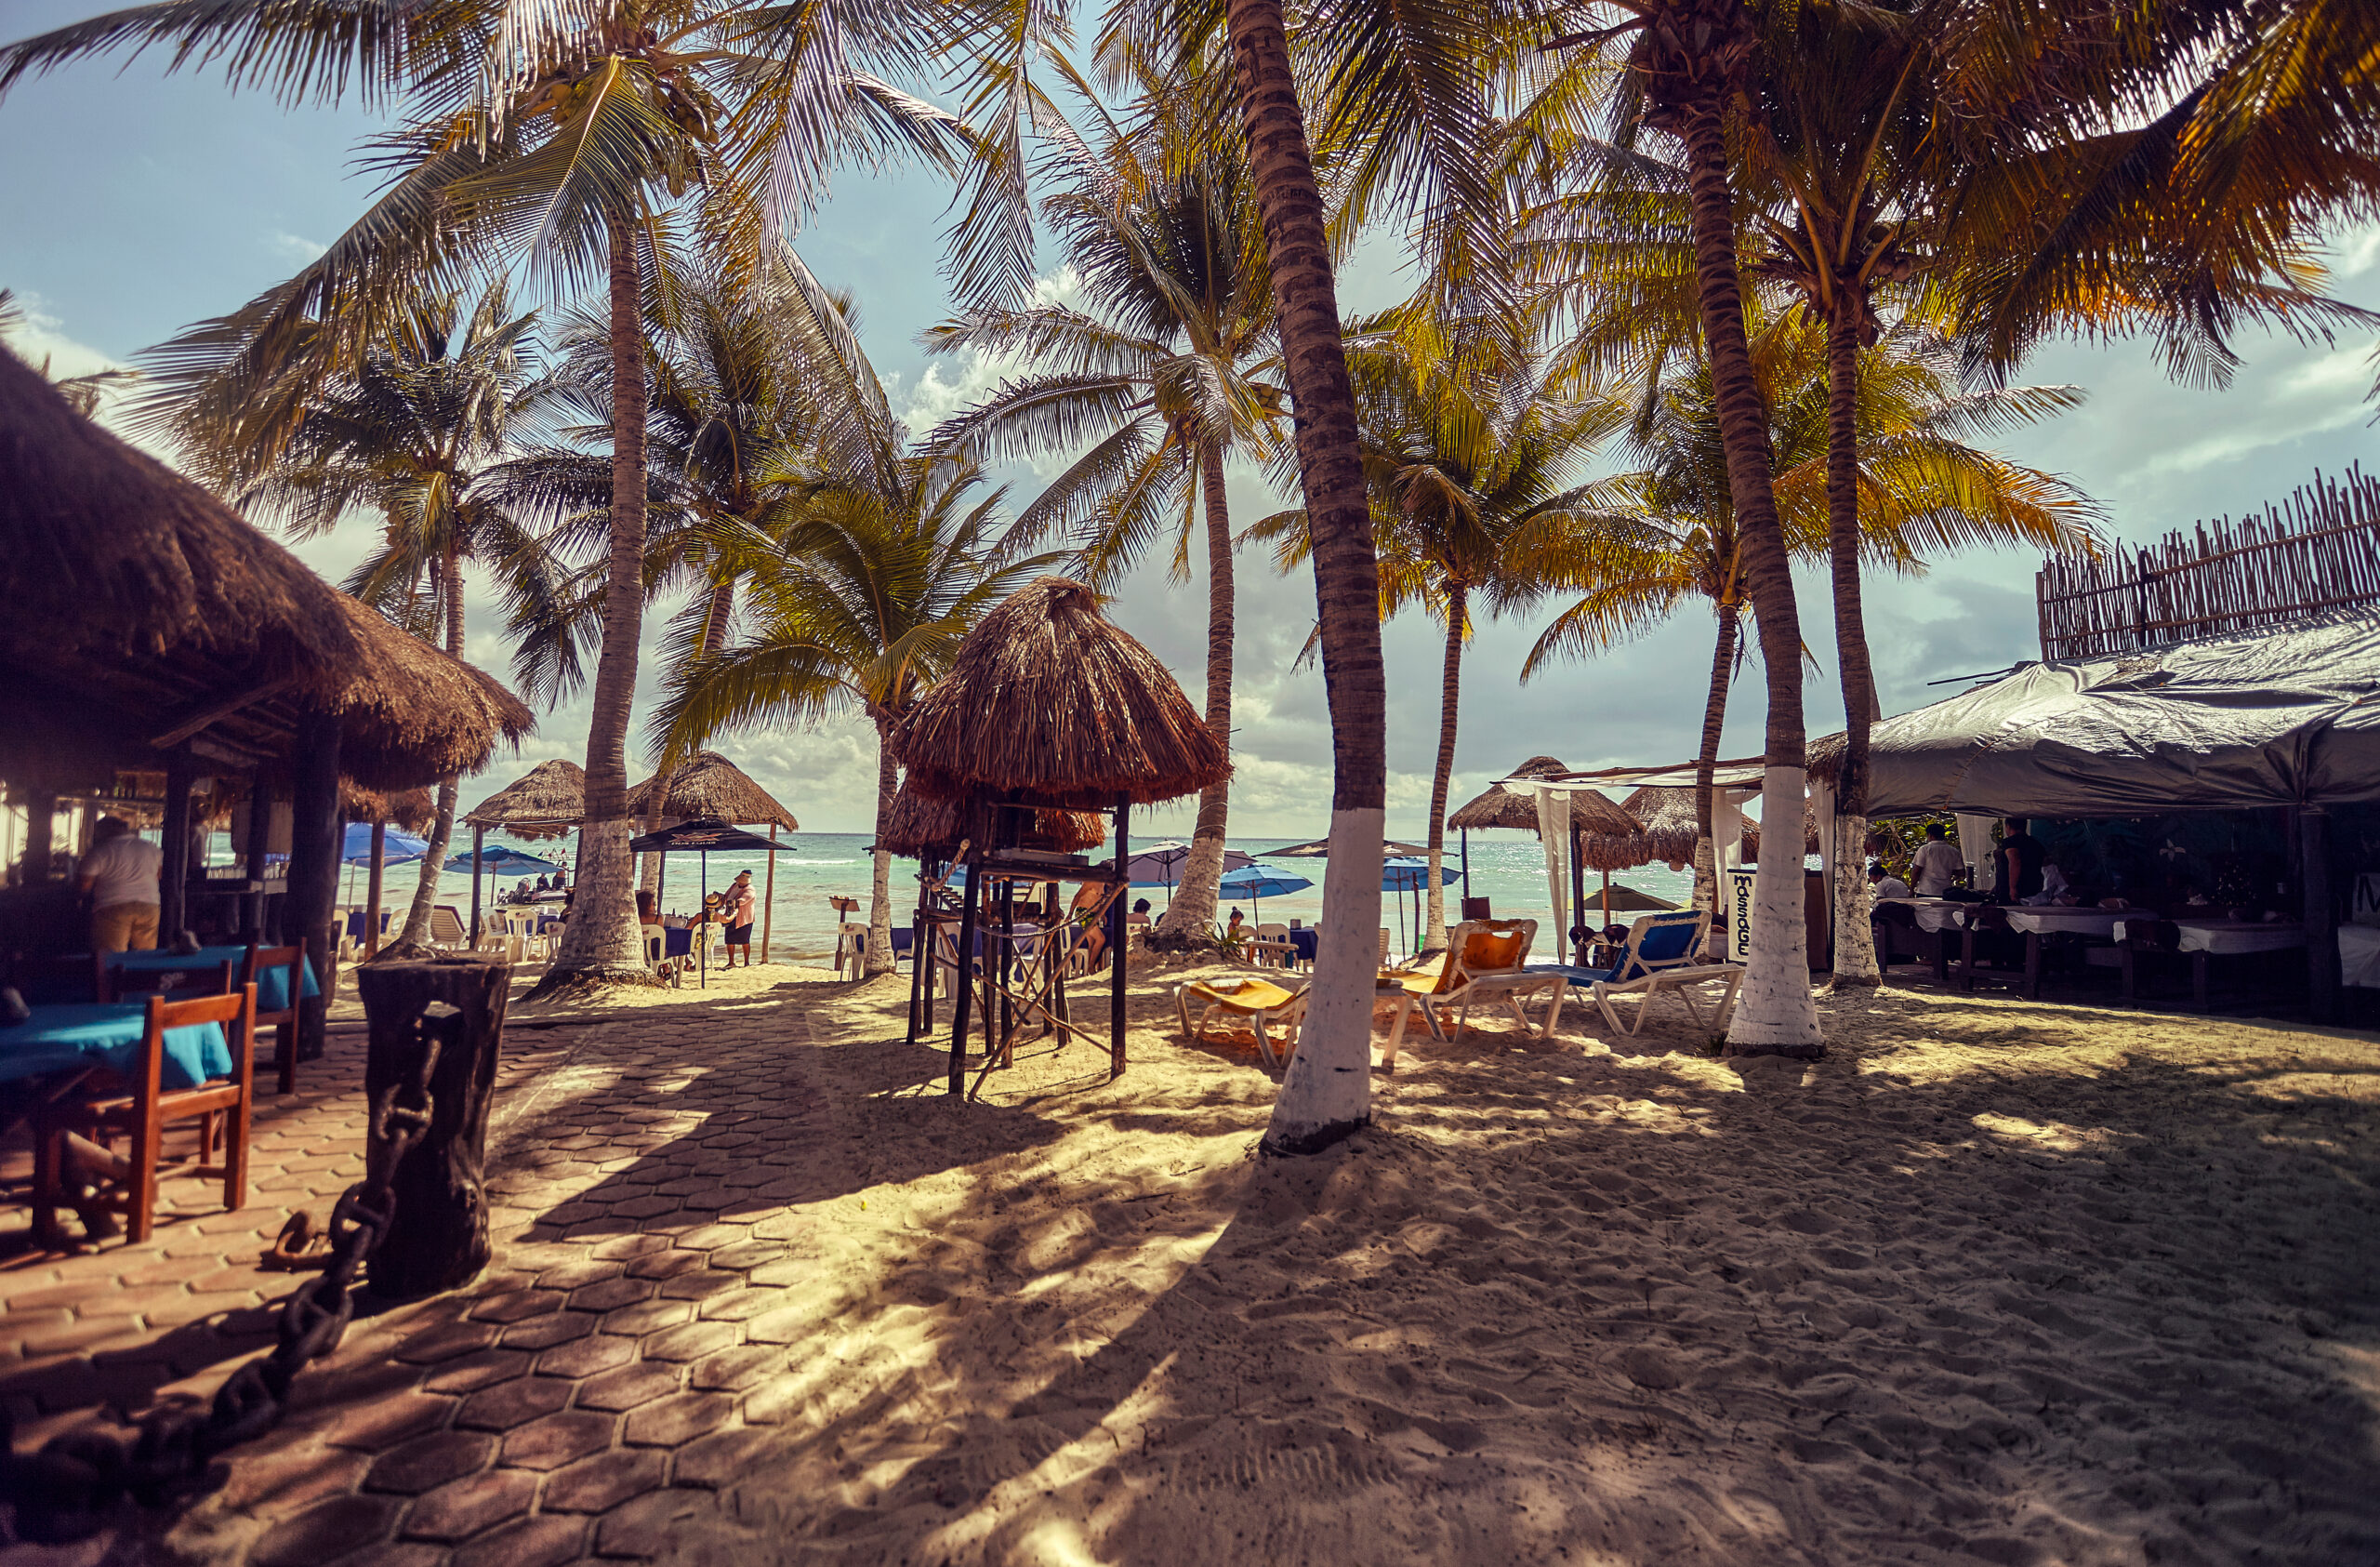 View of a glimpse of Playa del Carmen beach in Mexico, full of palm trees and with some bar huts.